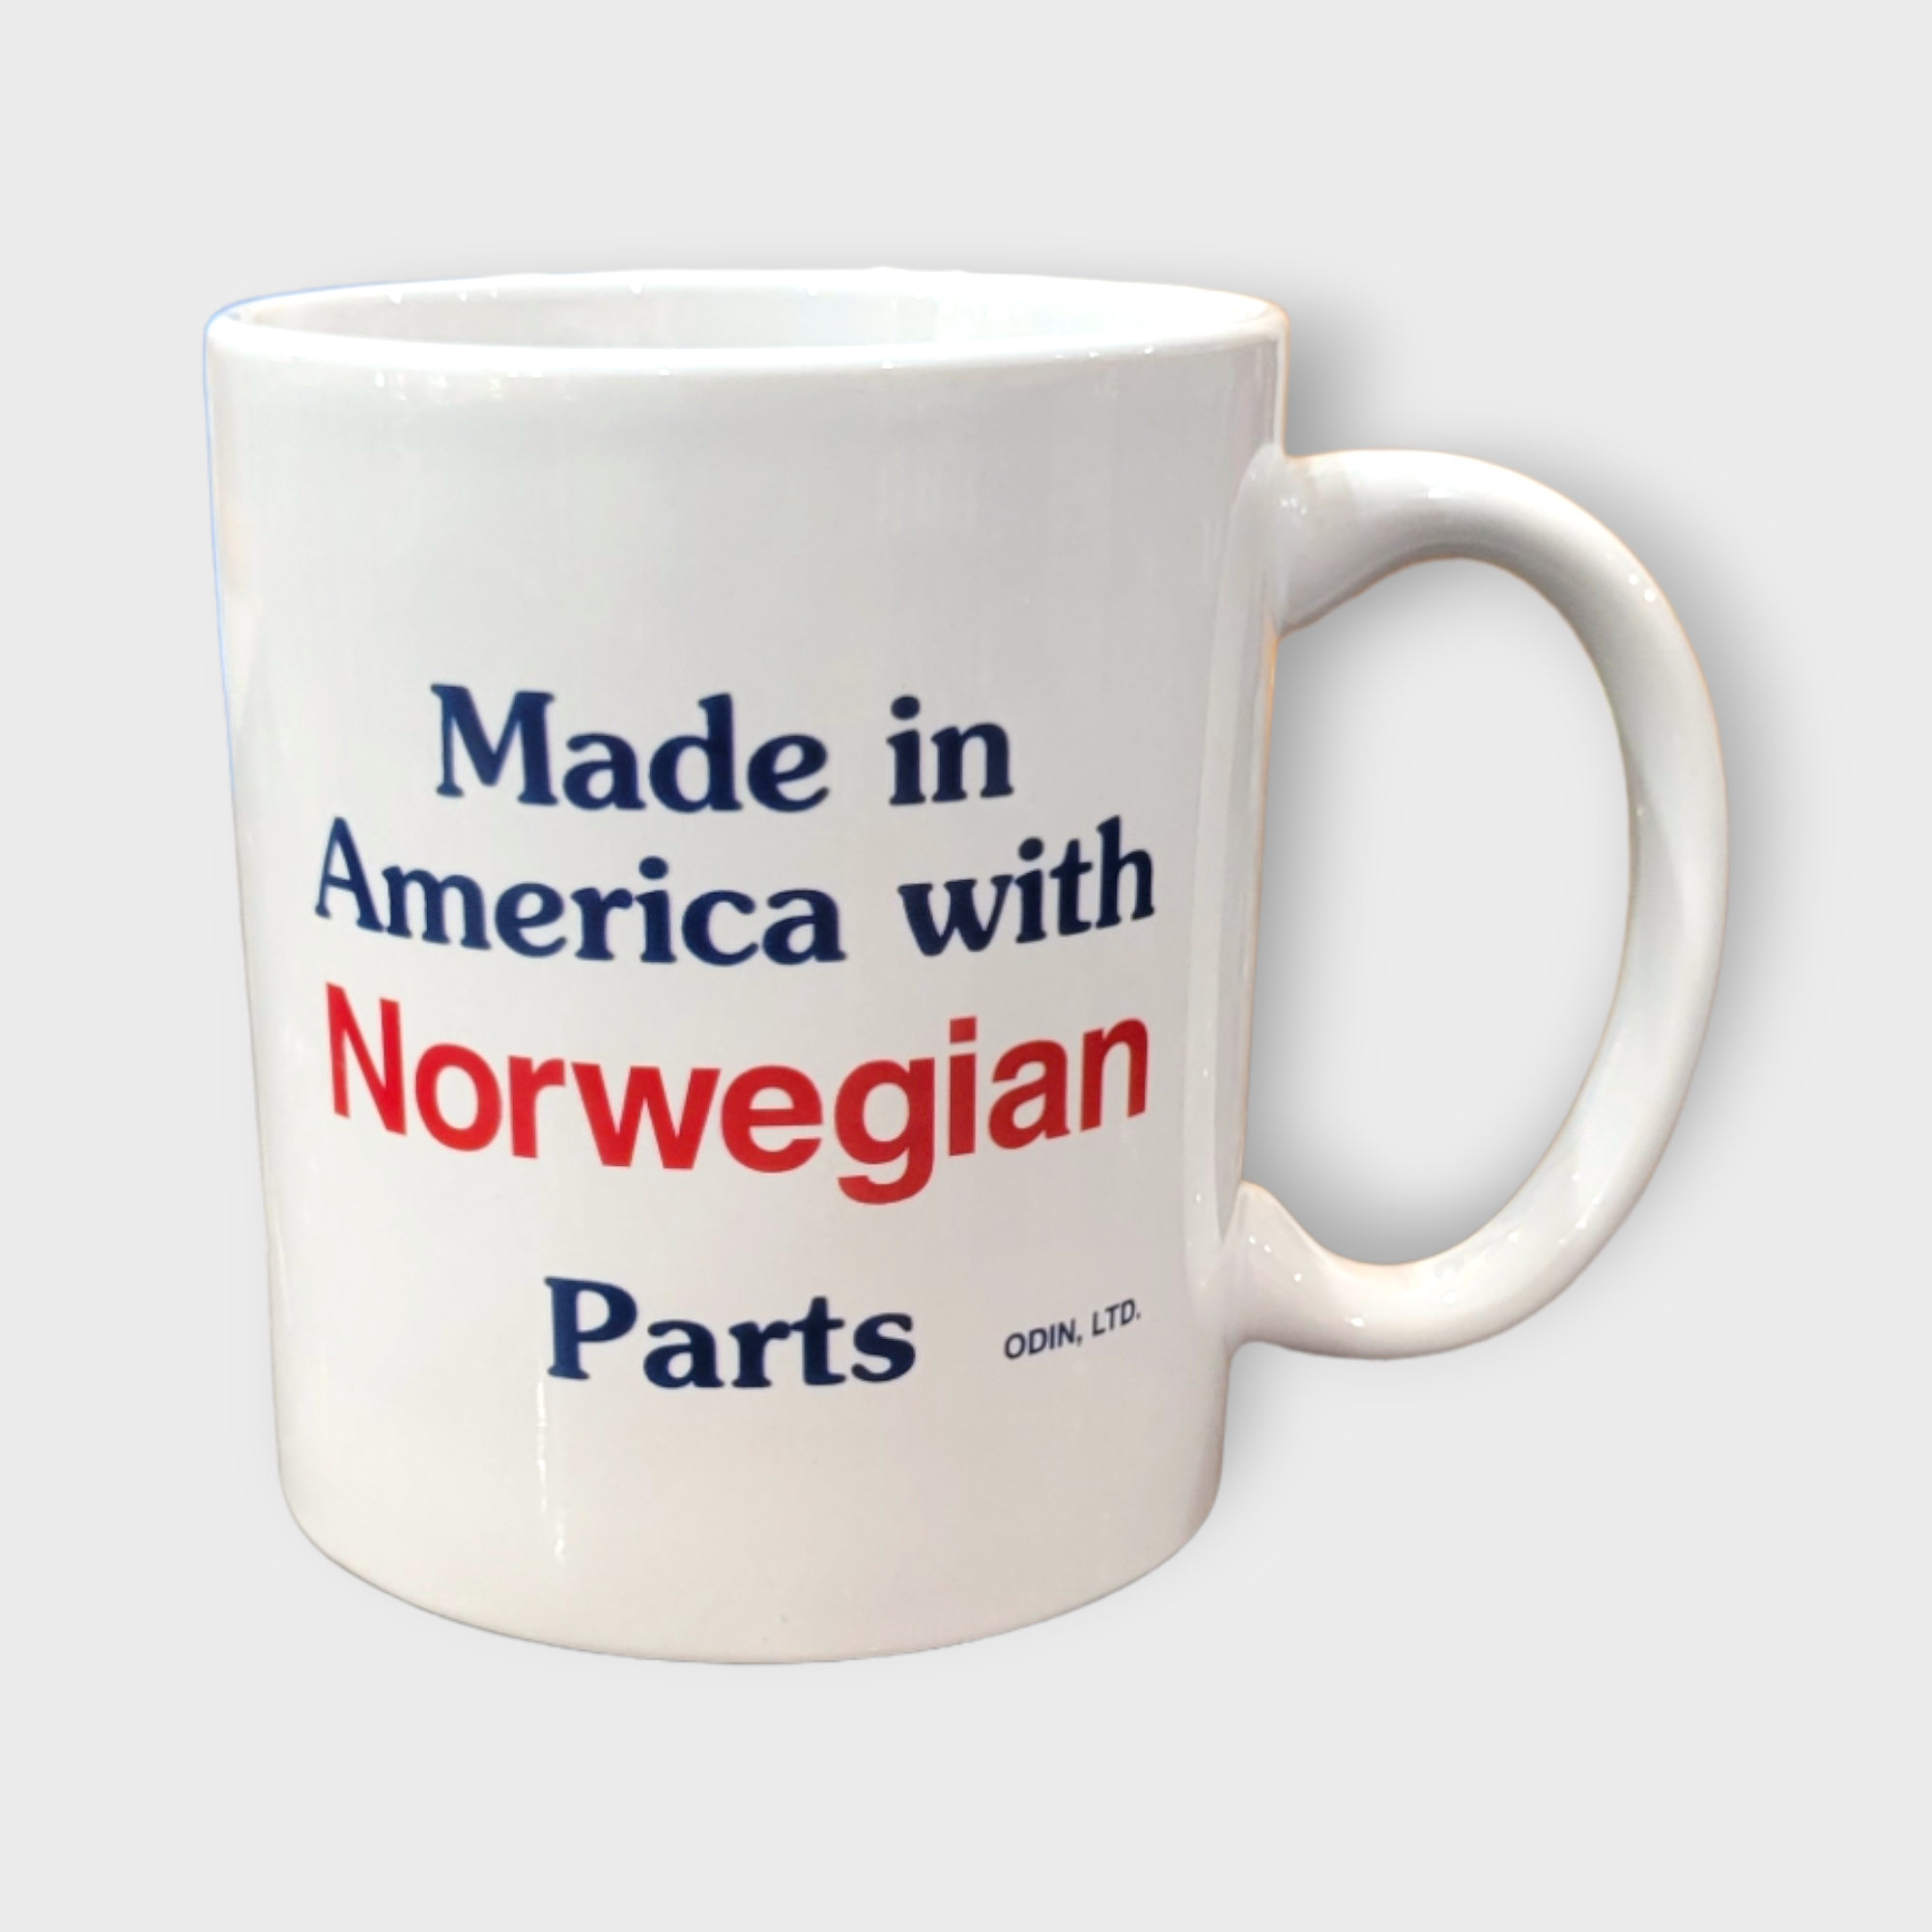 Mug: "Made in American with Norwegian Parts" (11oz)